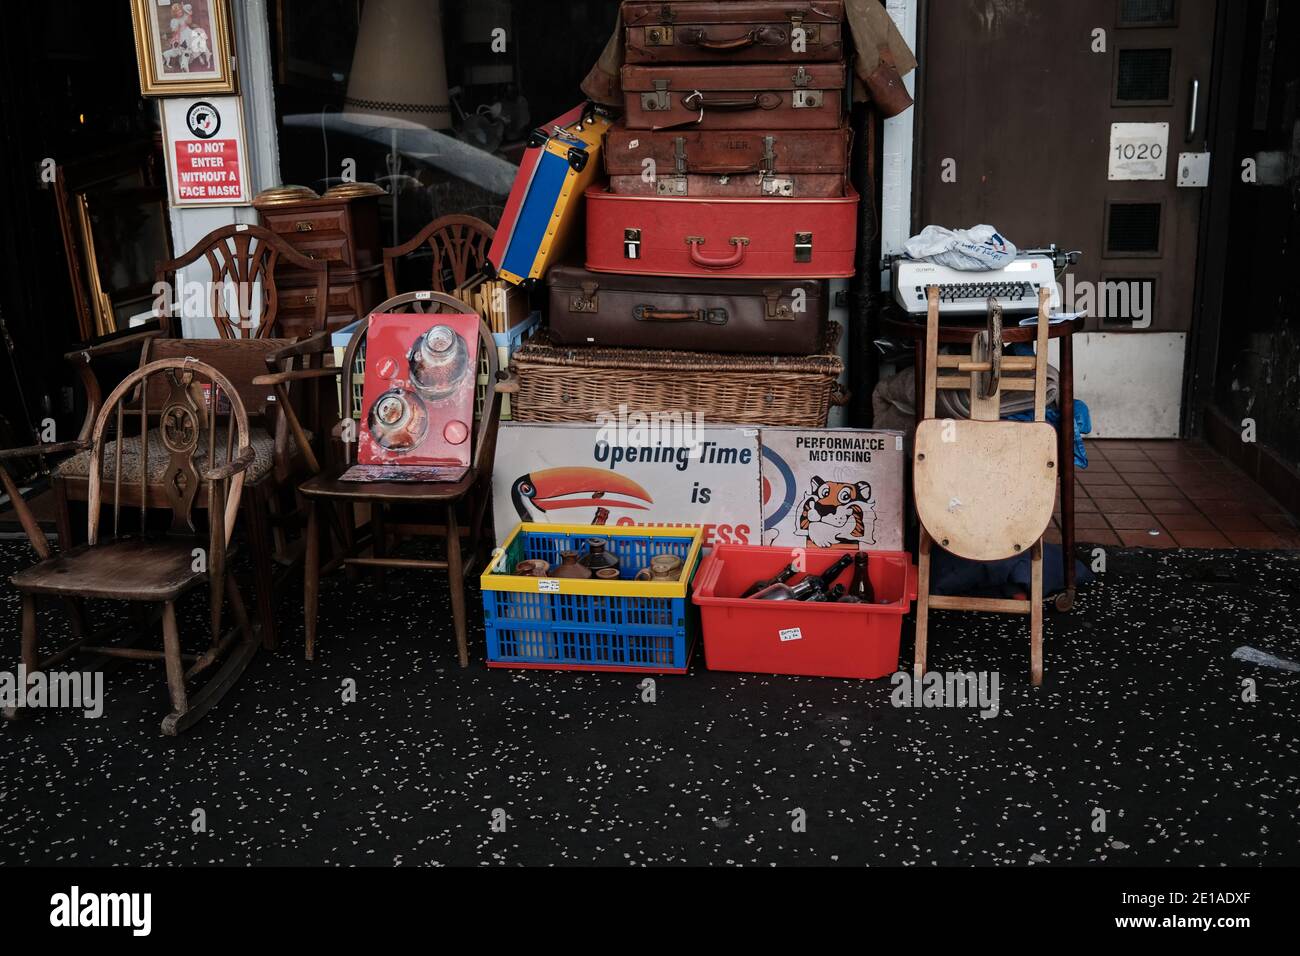 Items outside shop for sale, Finnieston. Glasgow (December 2020) Stock Photo